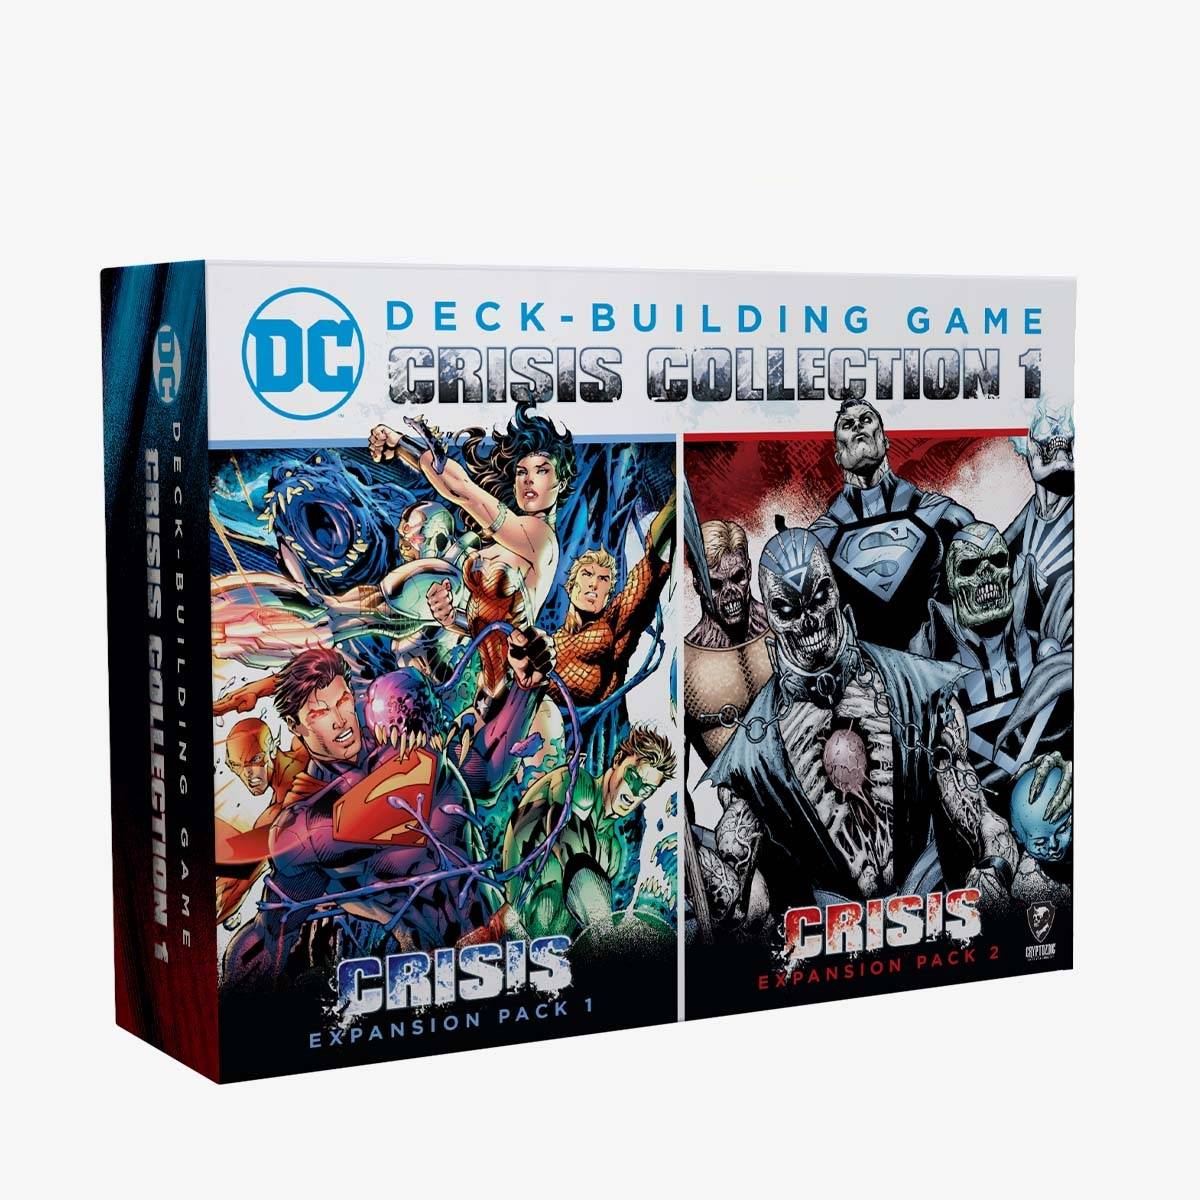 DC Deck-Building Game: Crisis Collection 1... Available Now!